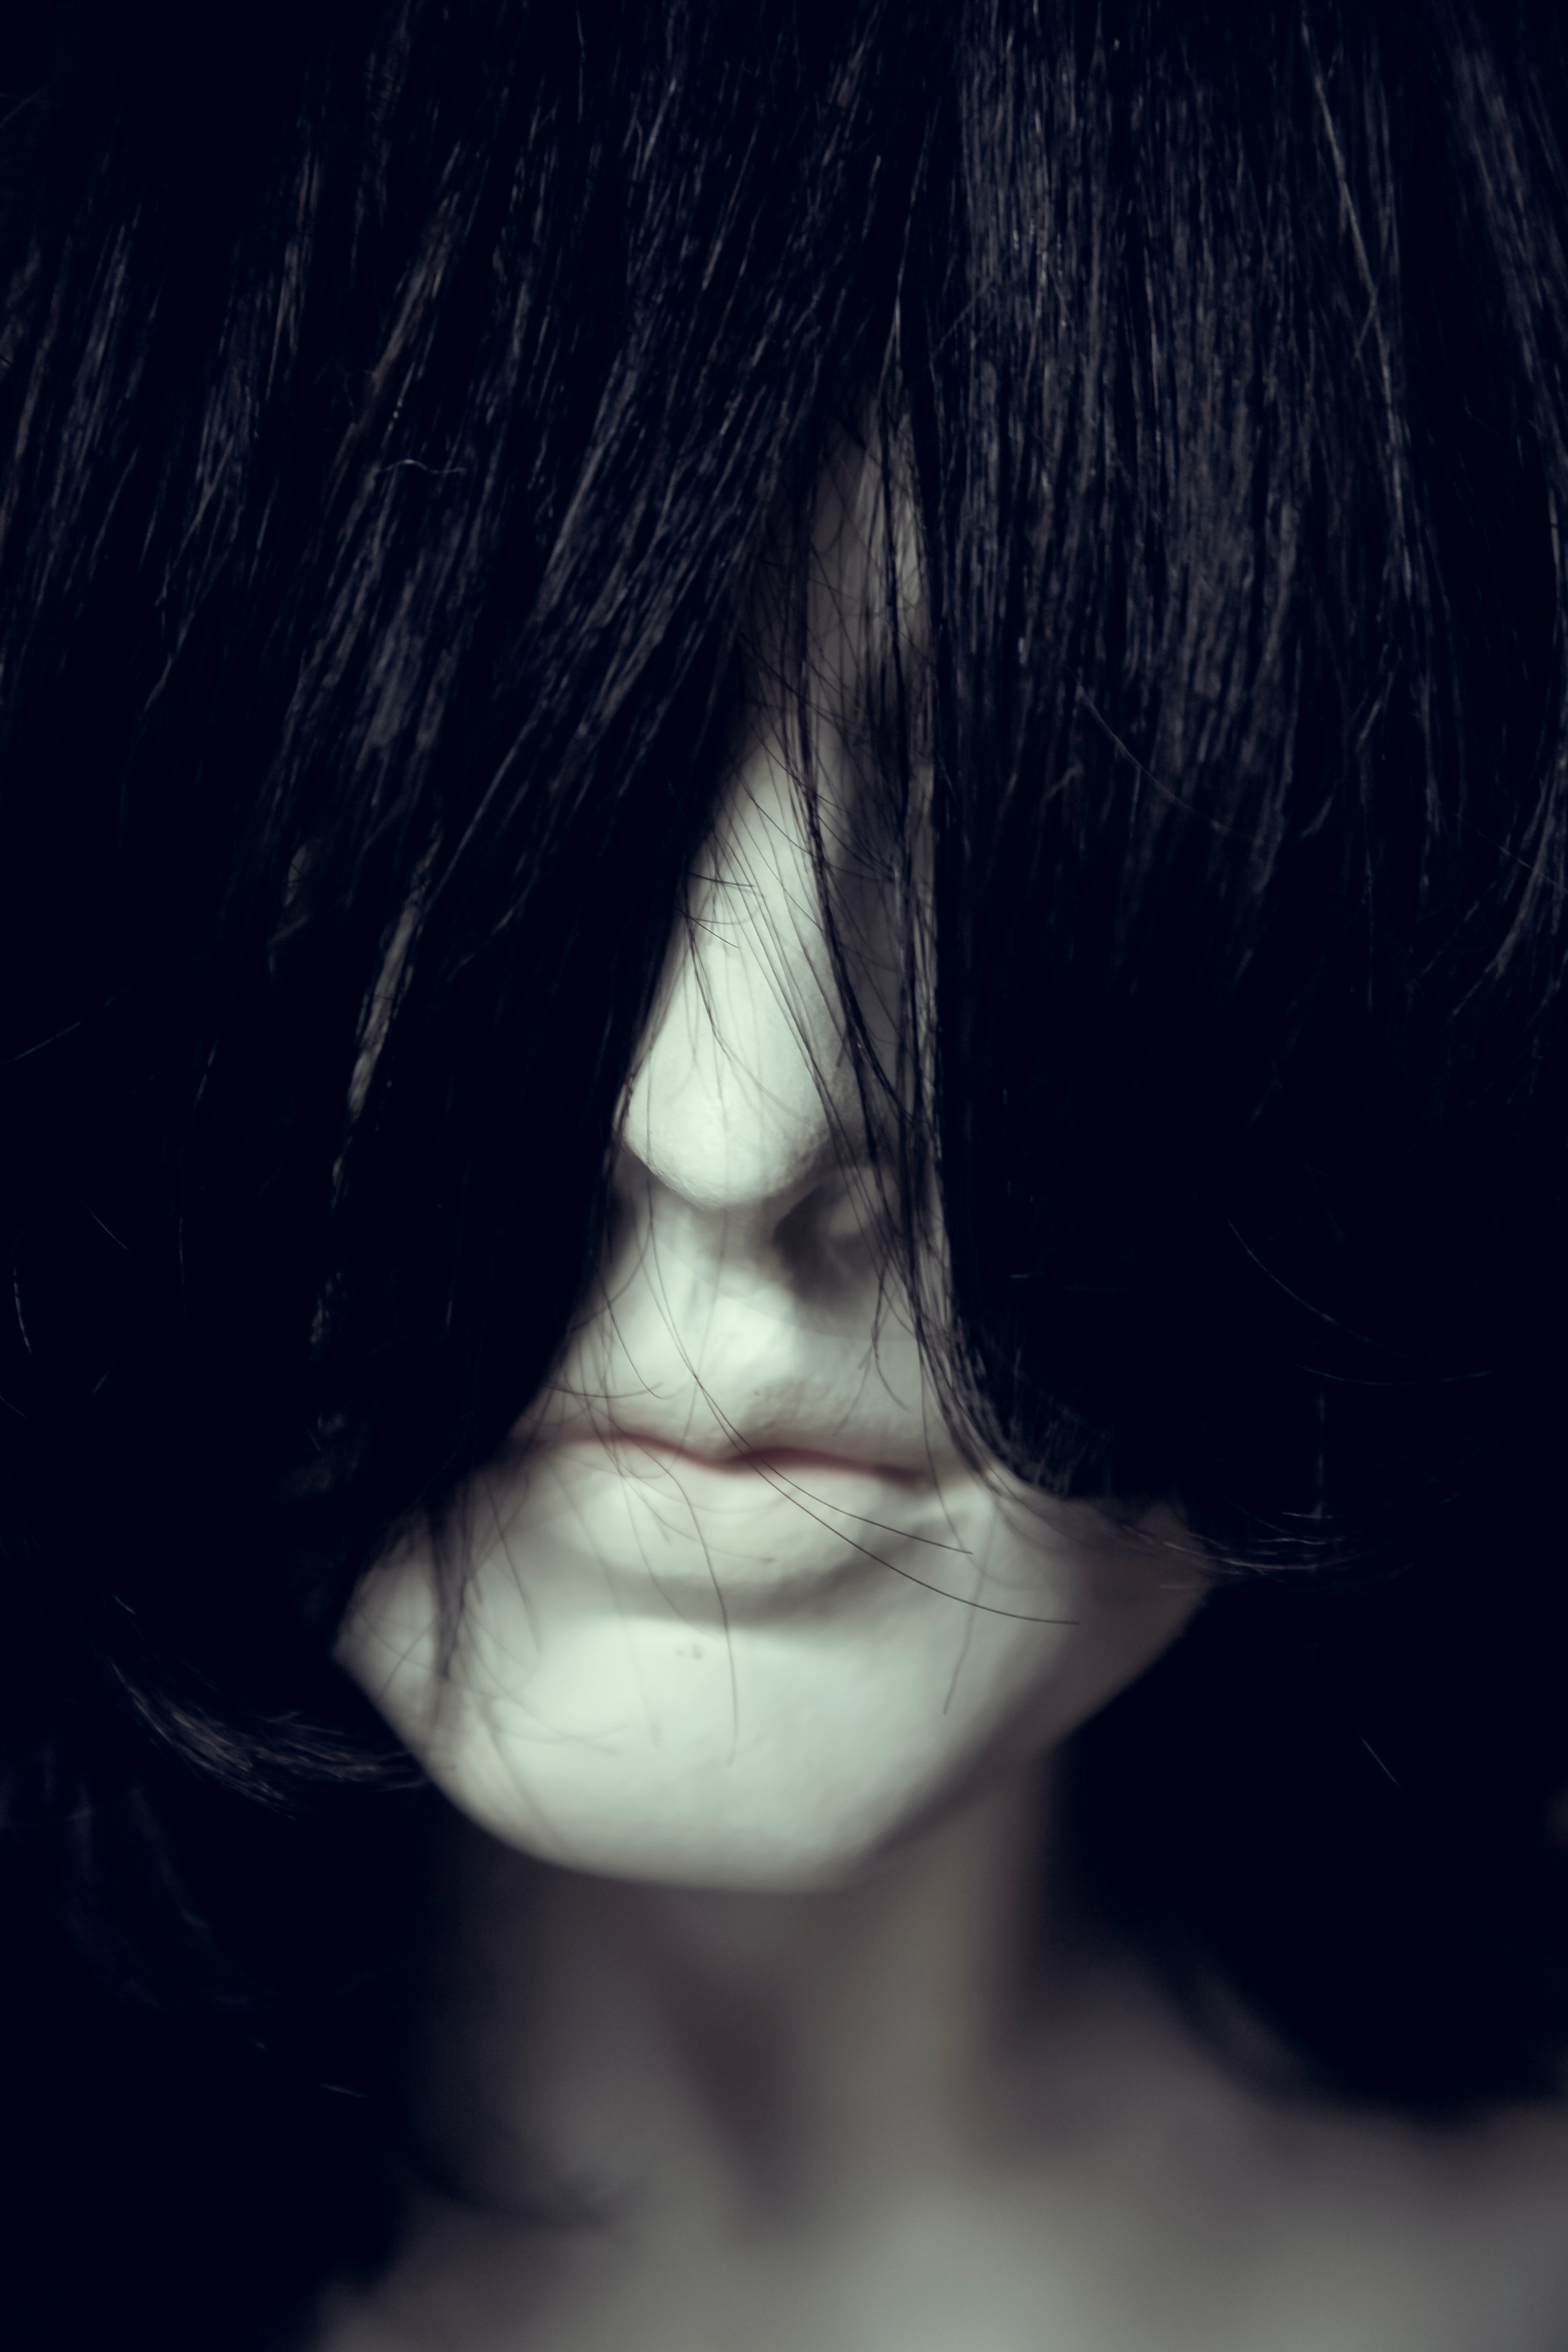 Woman Face Covered With Hair, Depressed, Depression, Hair, Mannequin, HQ Photo